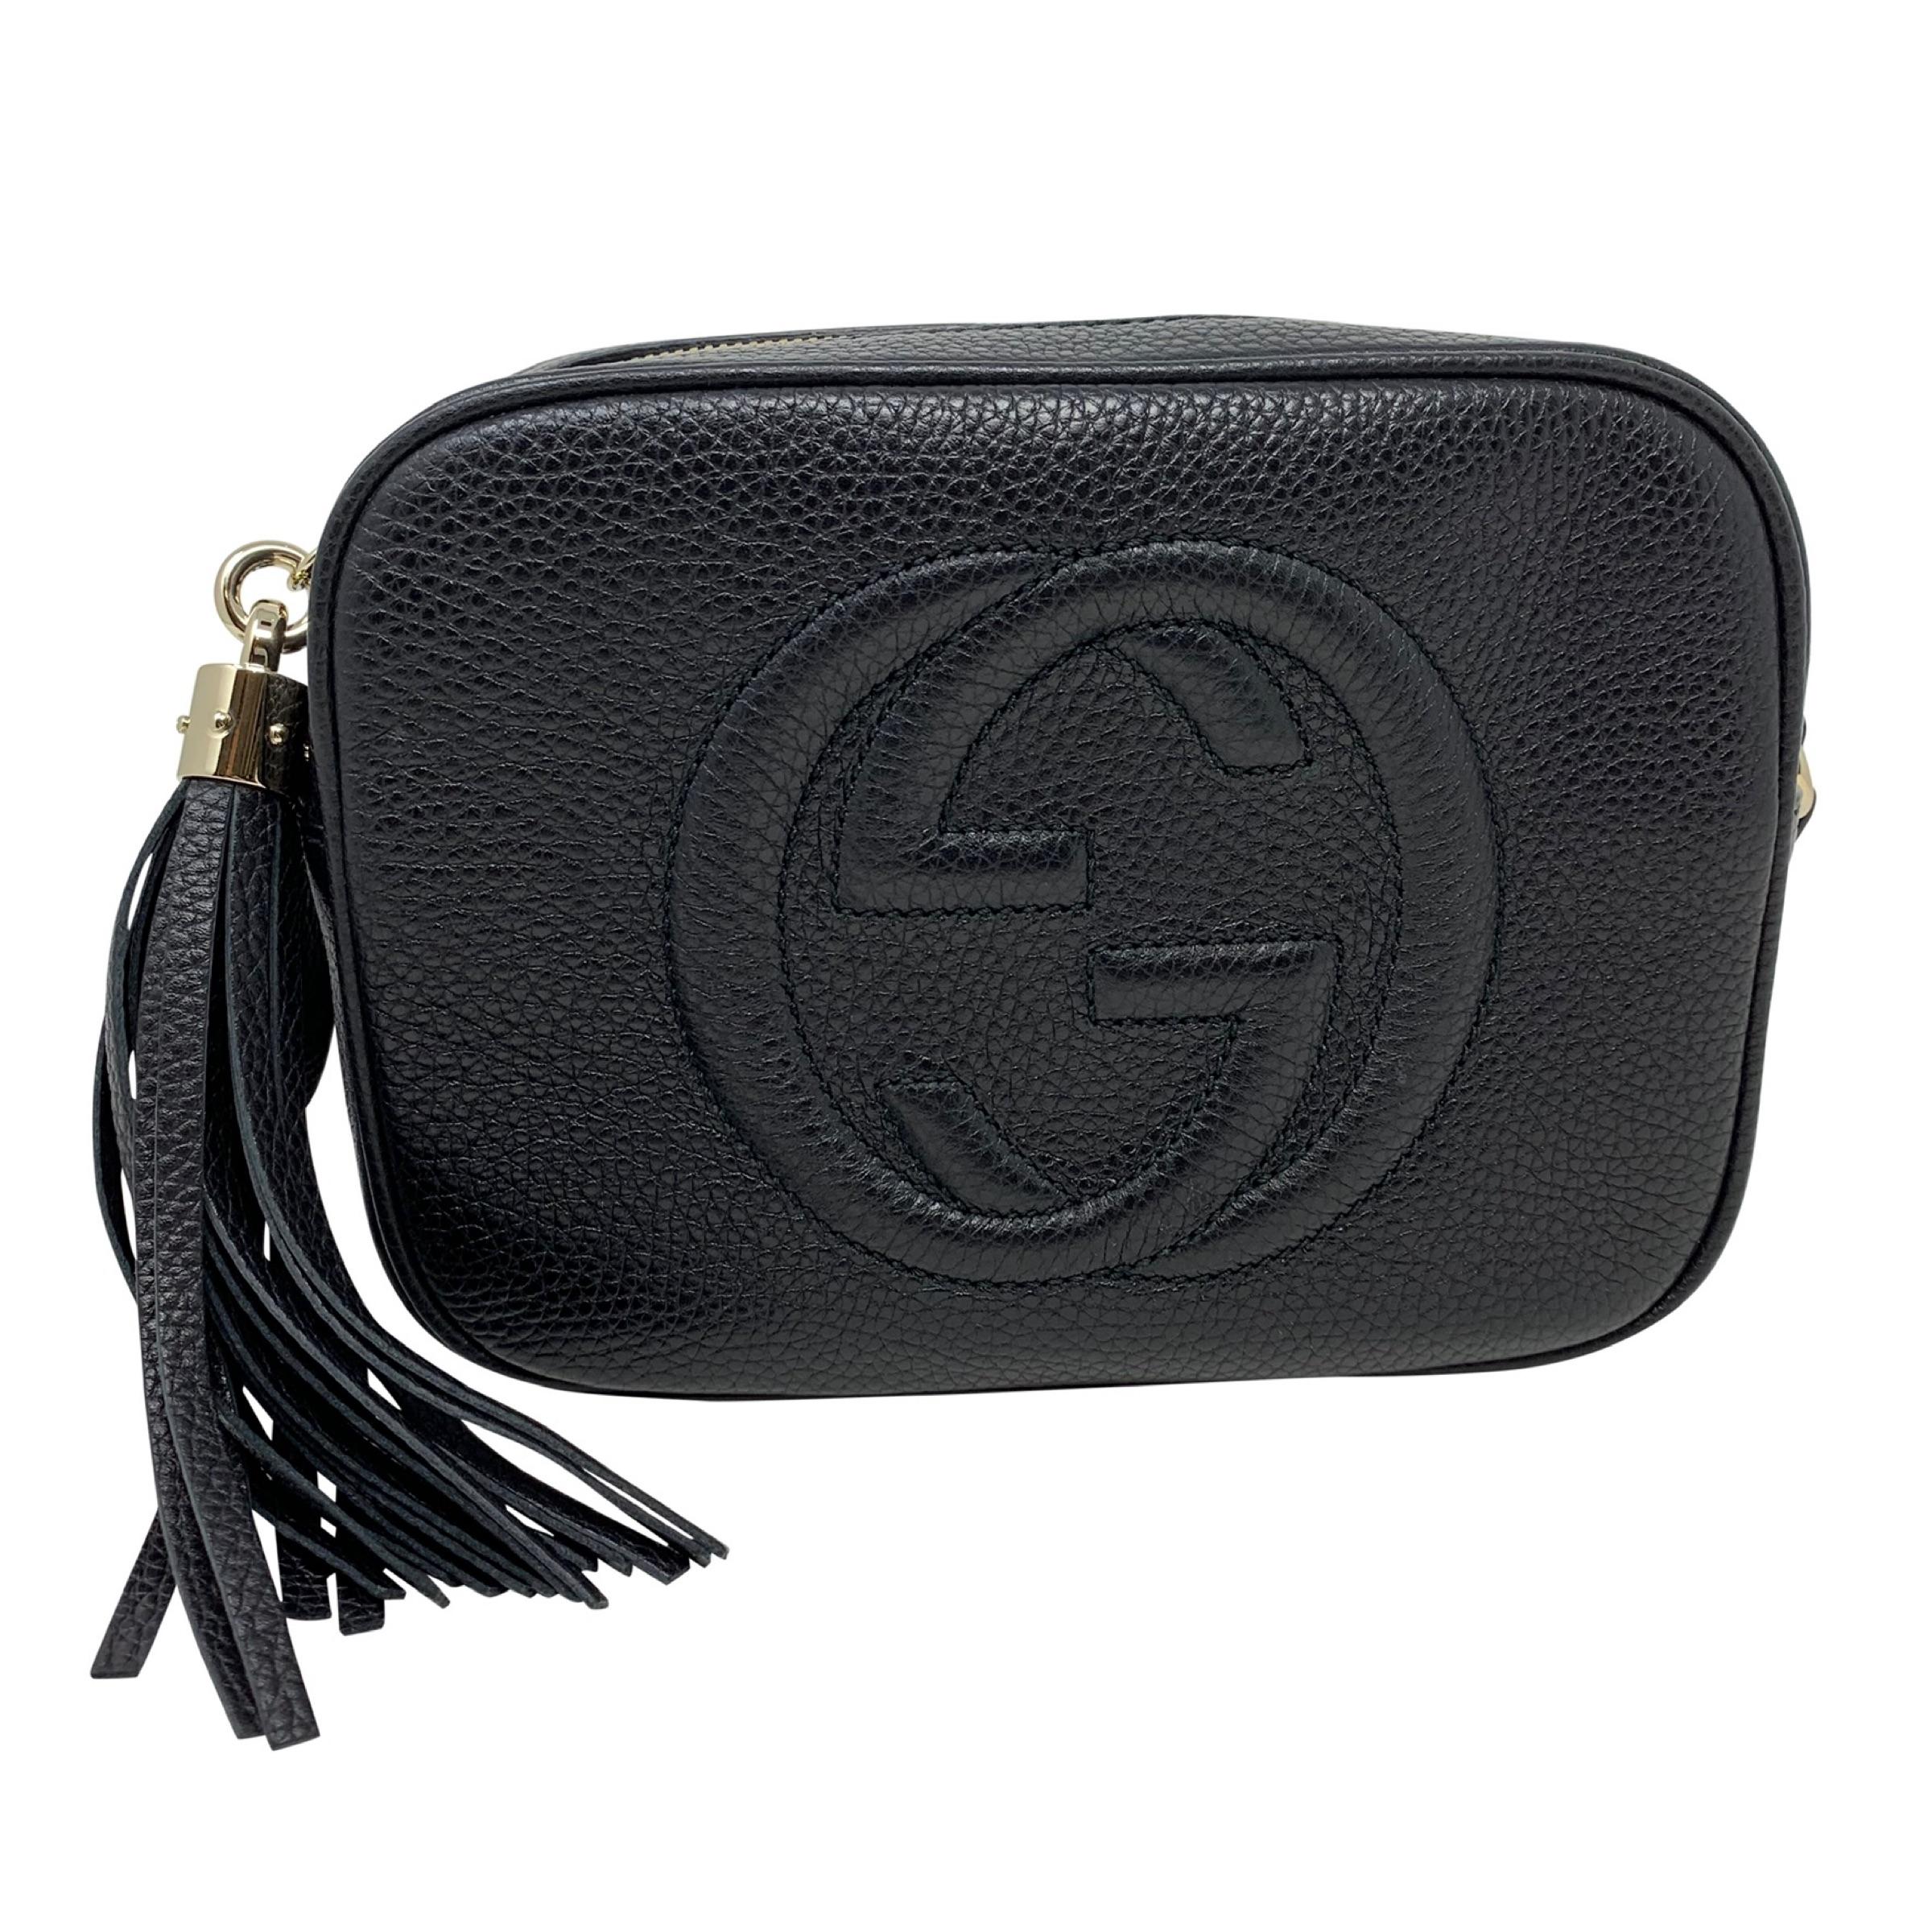 NEW Gucci Black Small Soho Disco Leather Crossbody Bag For Sale 2